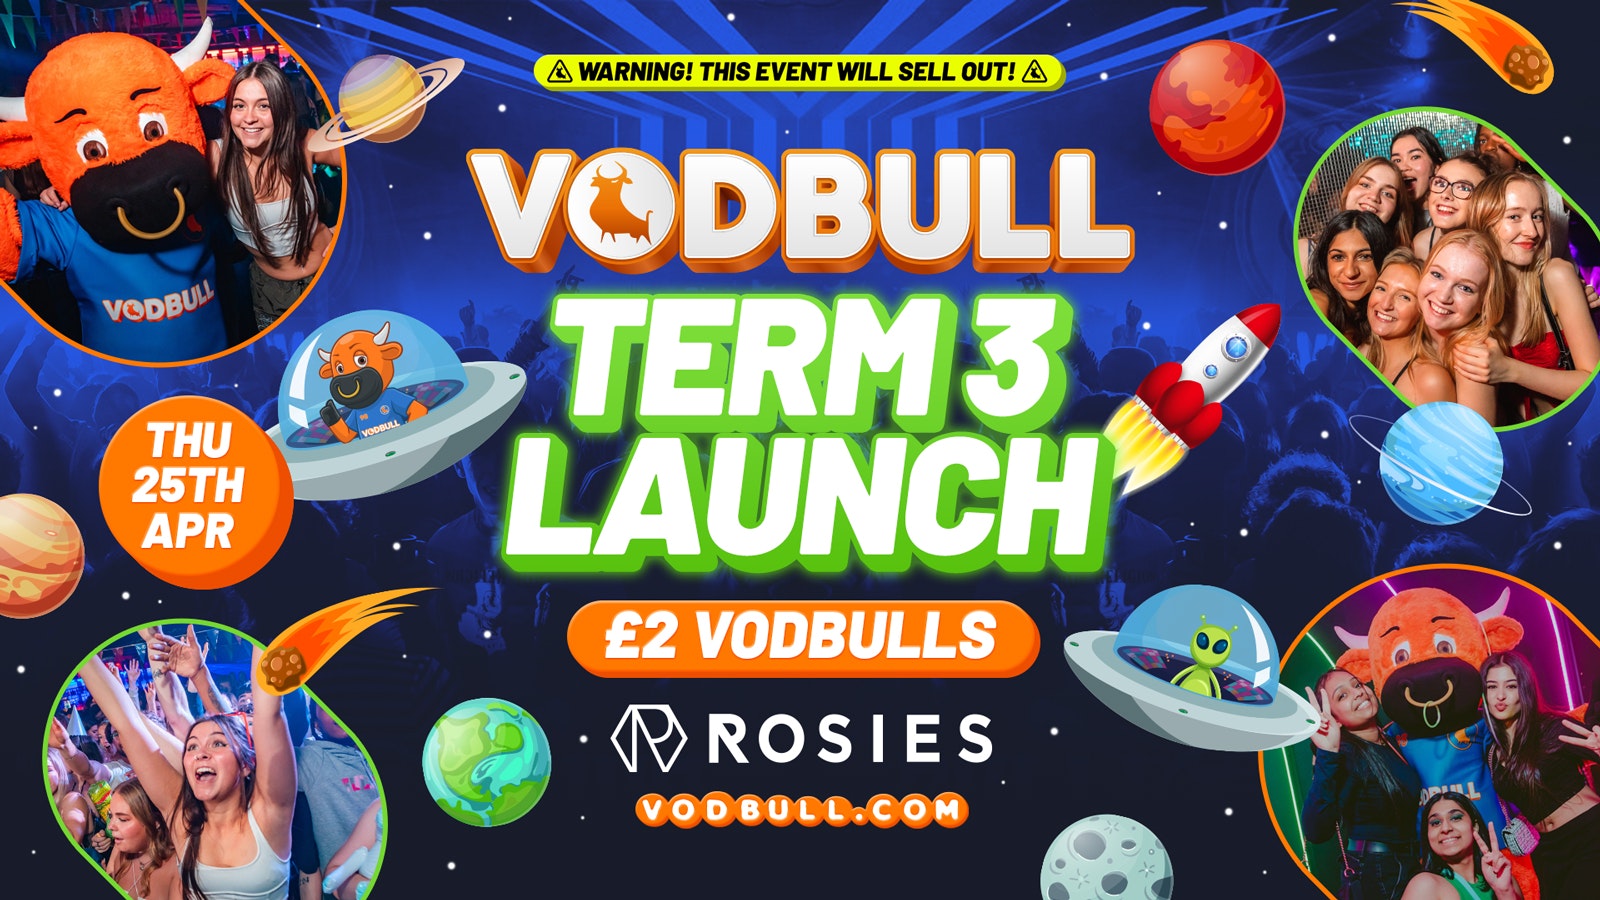 🧡 VODBULL at ROSIES!! [TONIGHT] 🛸 TERM 3 LAUNCH & APP LAUNCH 🚀25/04 🧡